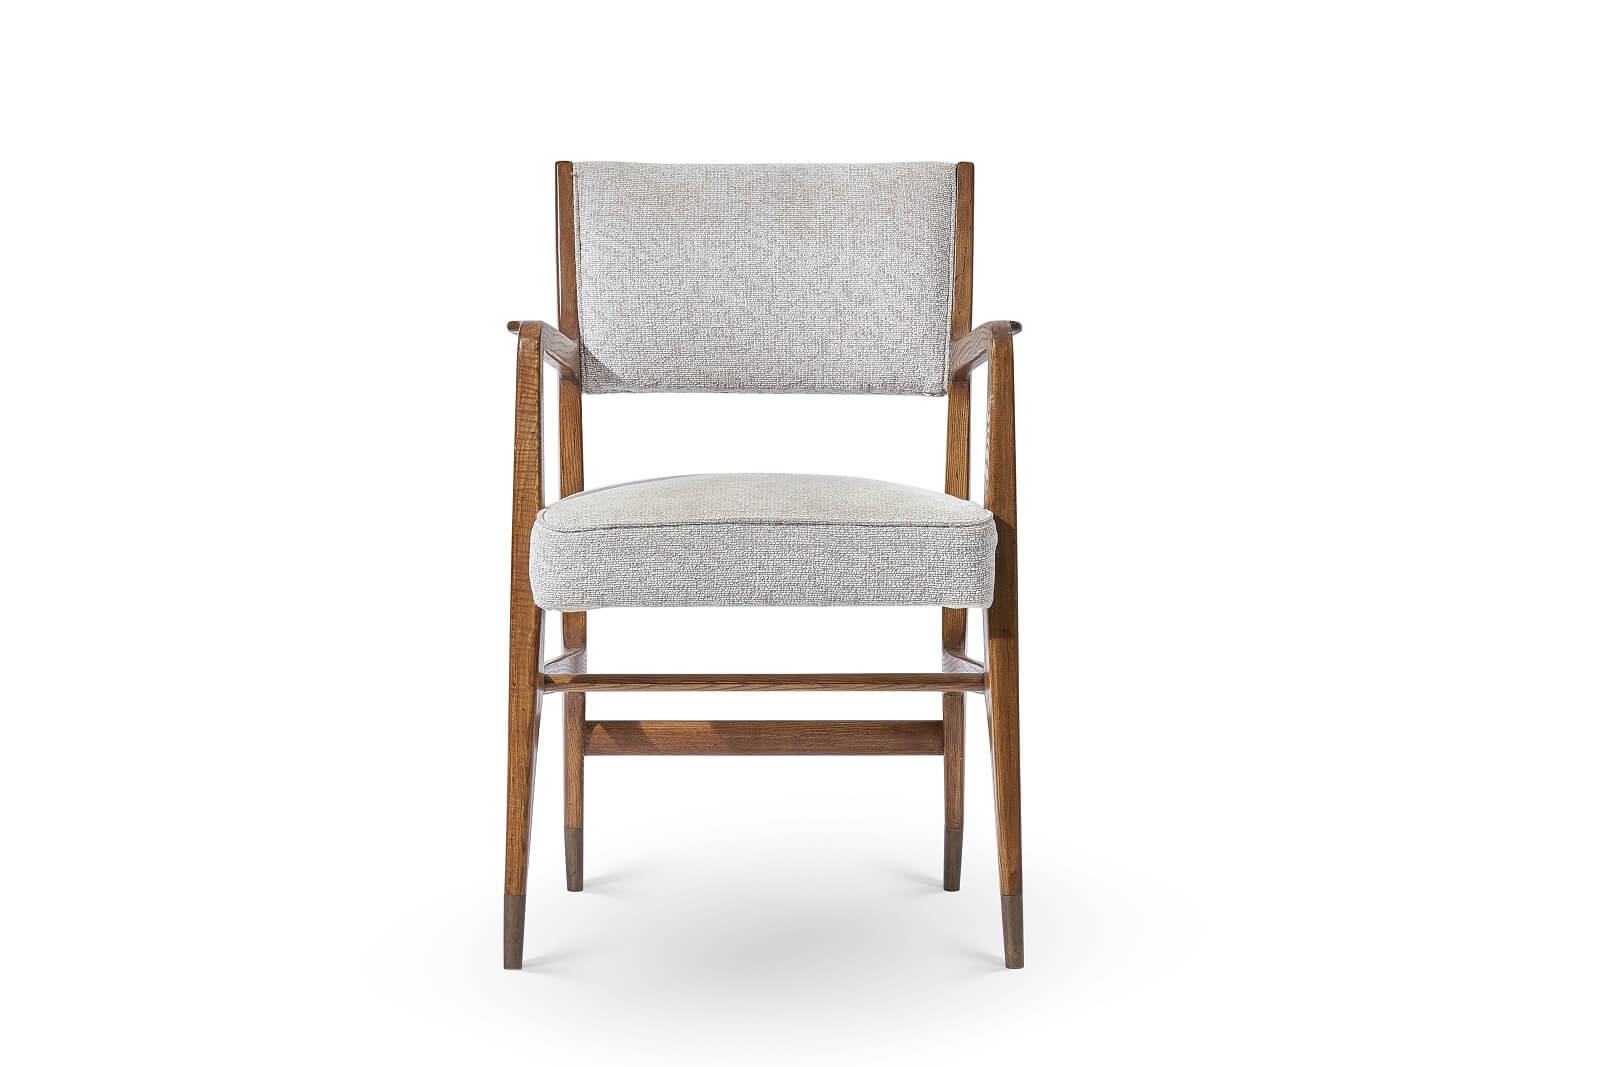 Chair by Gio Ponti for sale